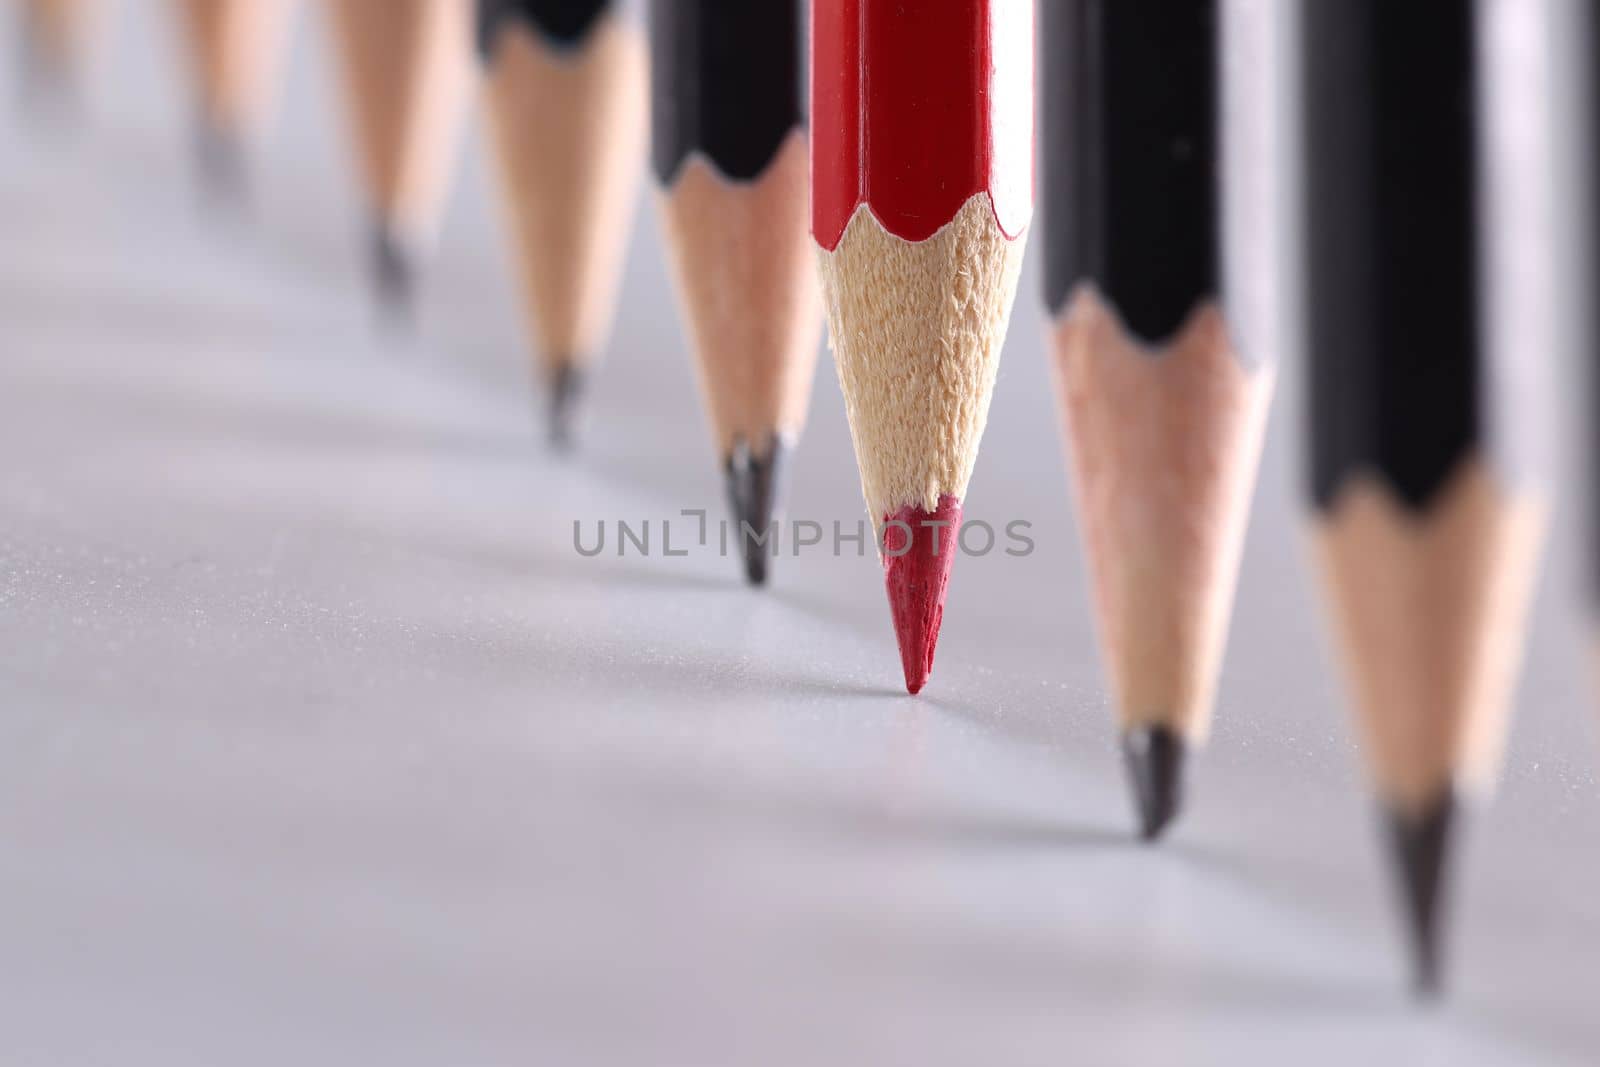 Red pencil stands out from crowd of many identical black pencils. Unique creative ideas for project